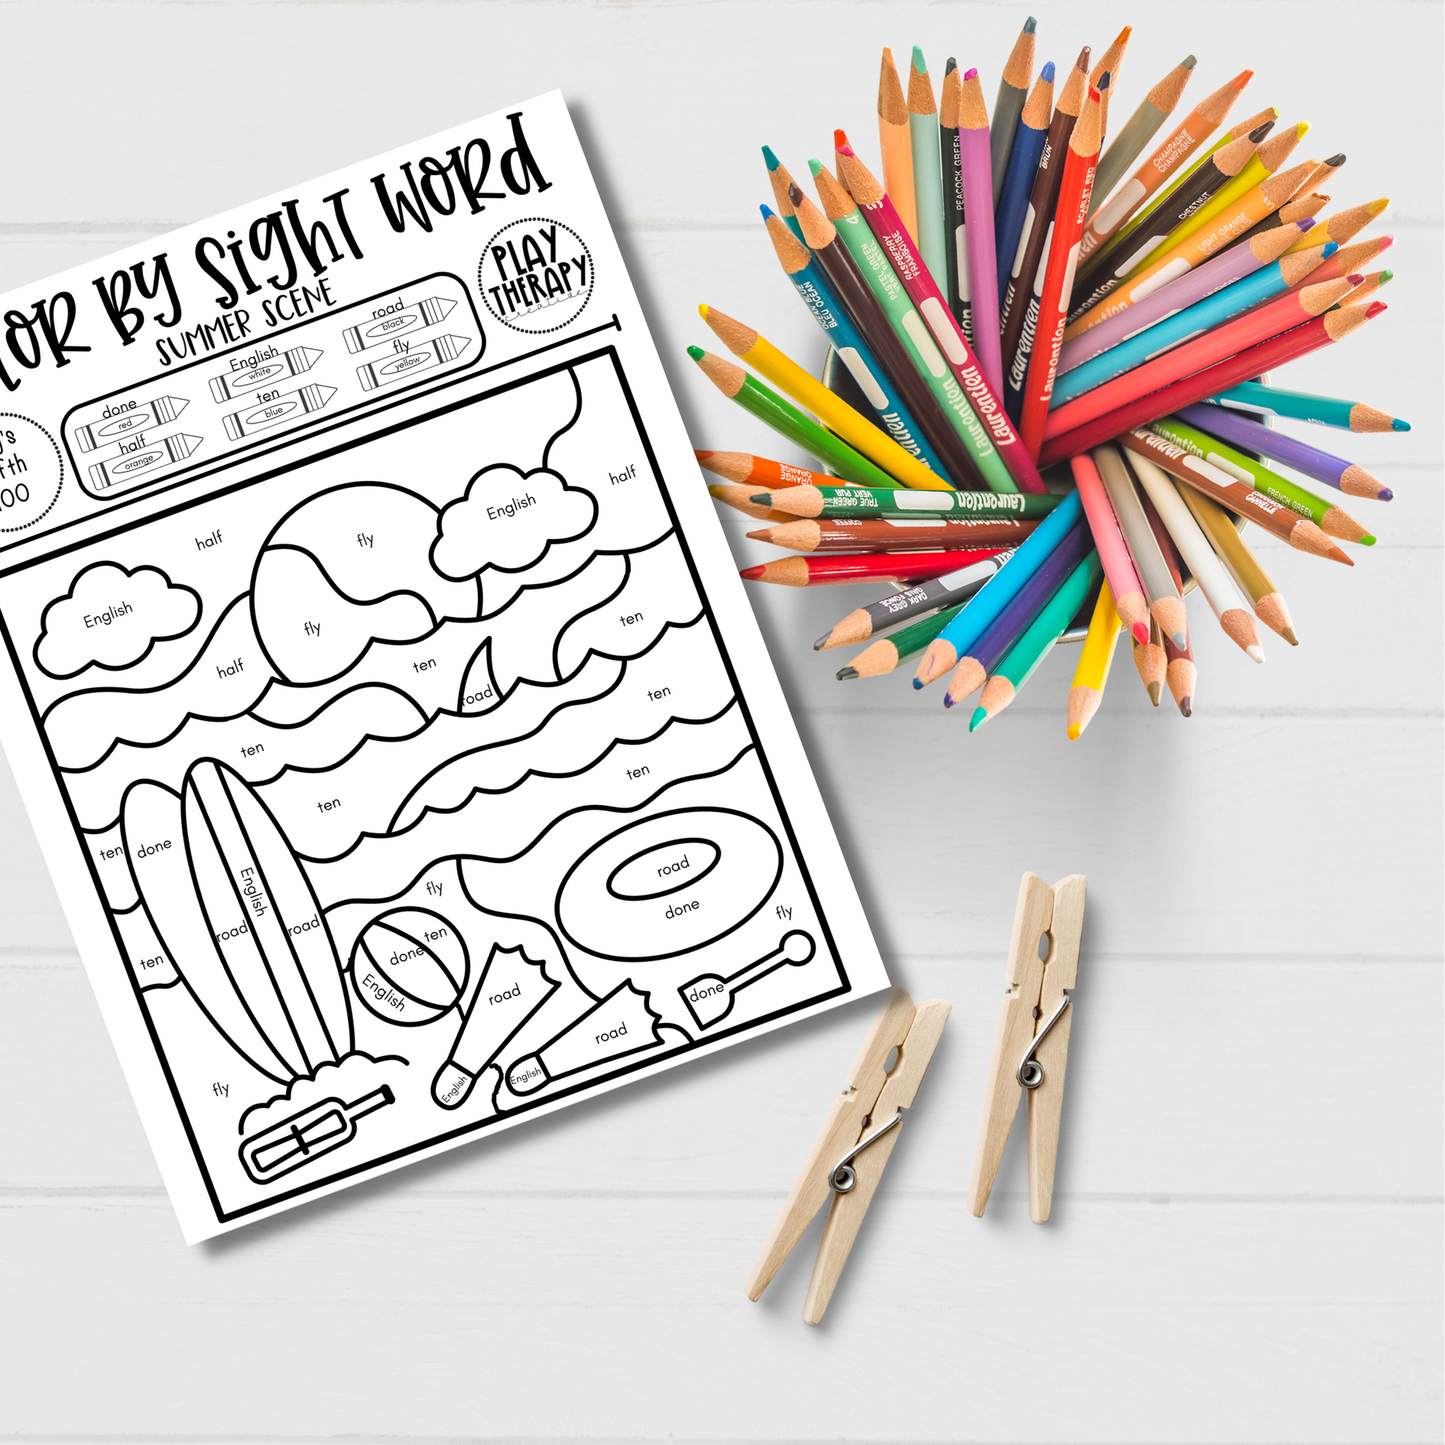 Fry's Fifth 100 Color-by-Sight-Word Coloring Page Practice Sheets - Summer Theme